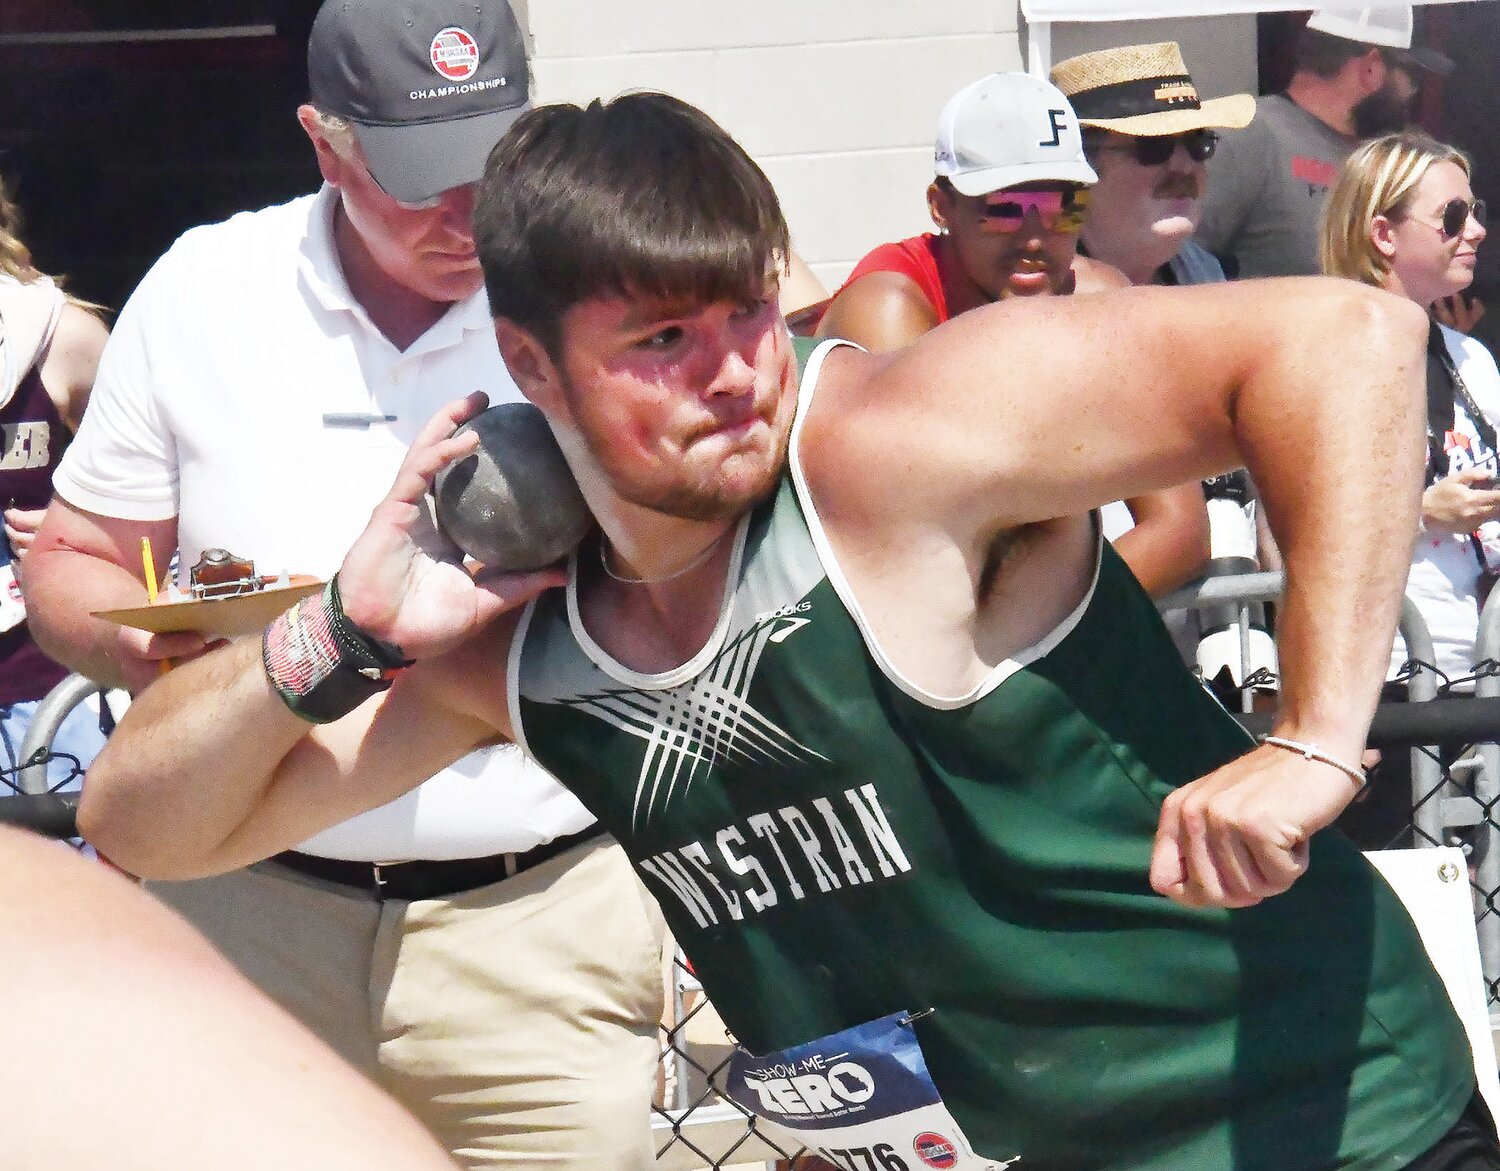 Westran's Langden Kitchen placed third in the Class 2 boys' shot put, capping his storied scholastic career in style.